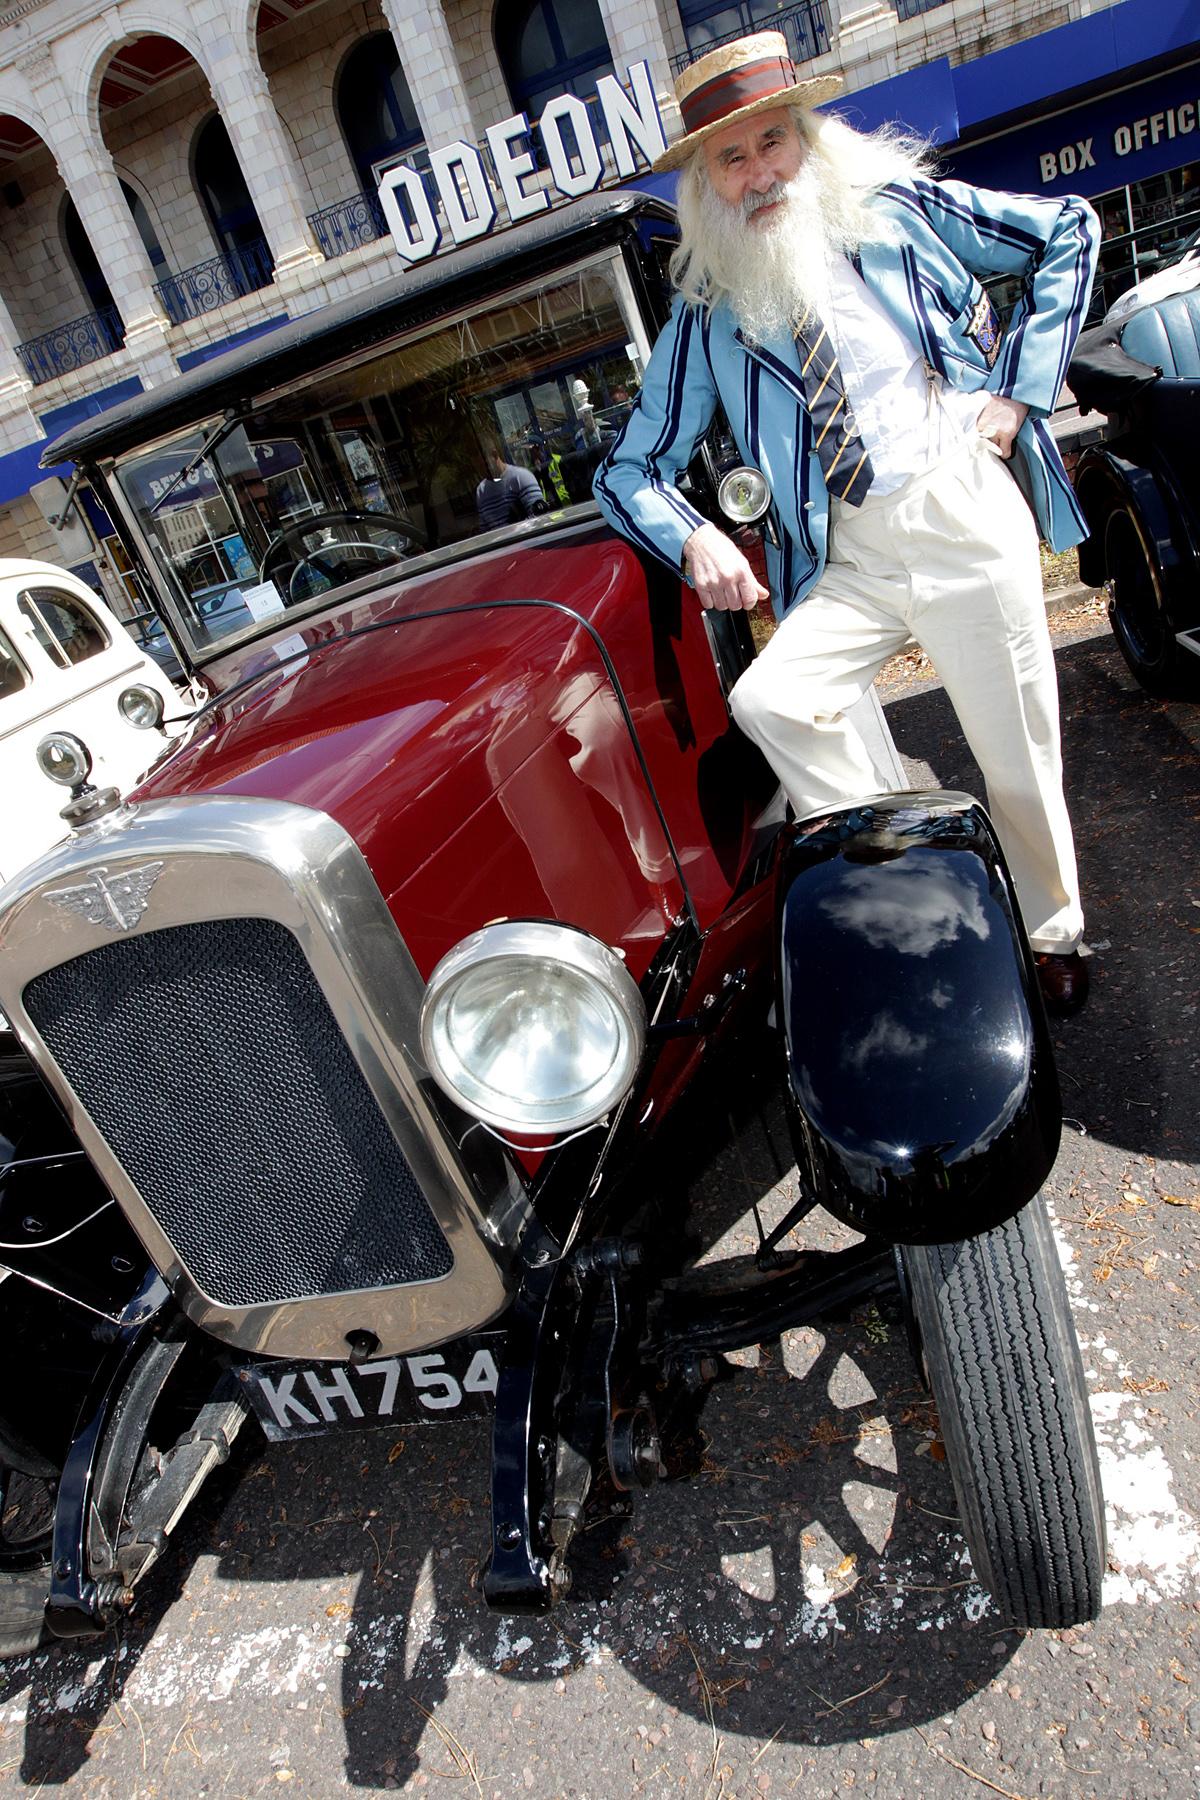 All our pictures from the second day of the Bournemouth Wheels Festival 2014 on Sunday, May 25.